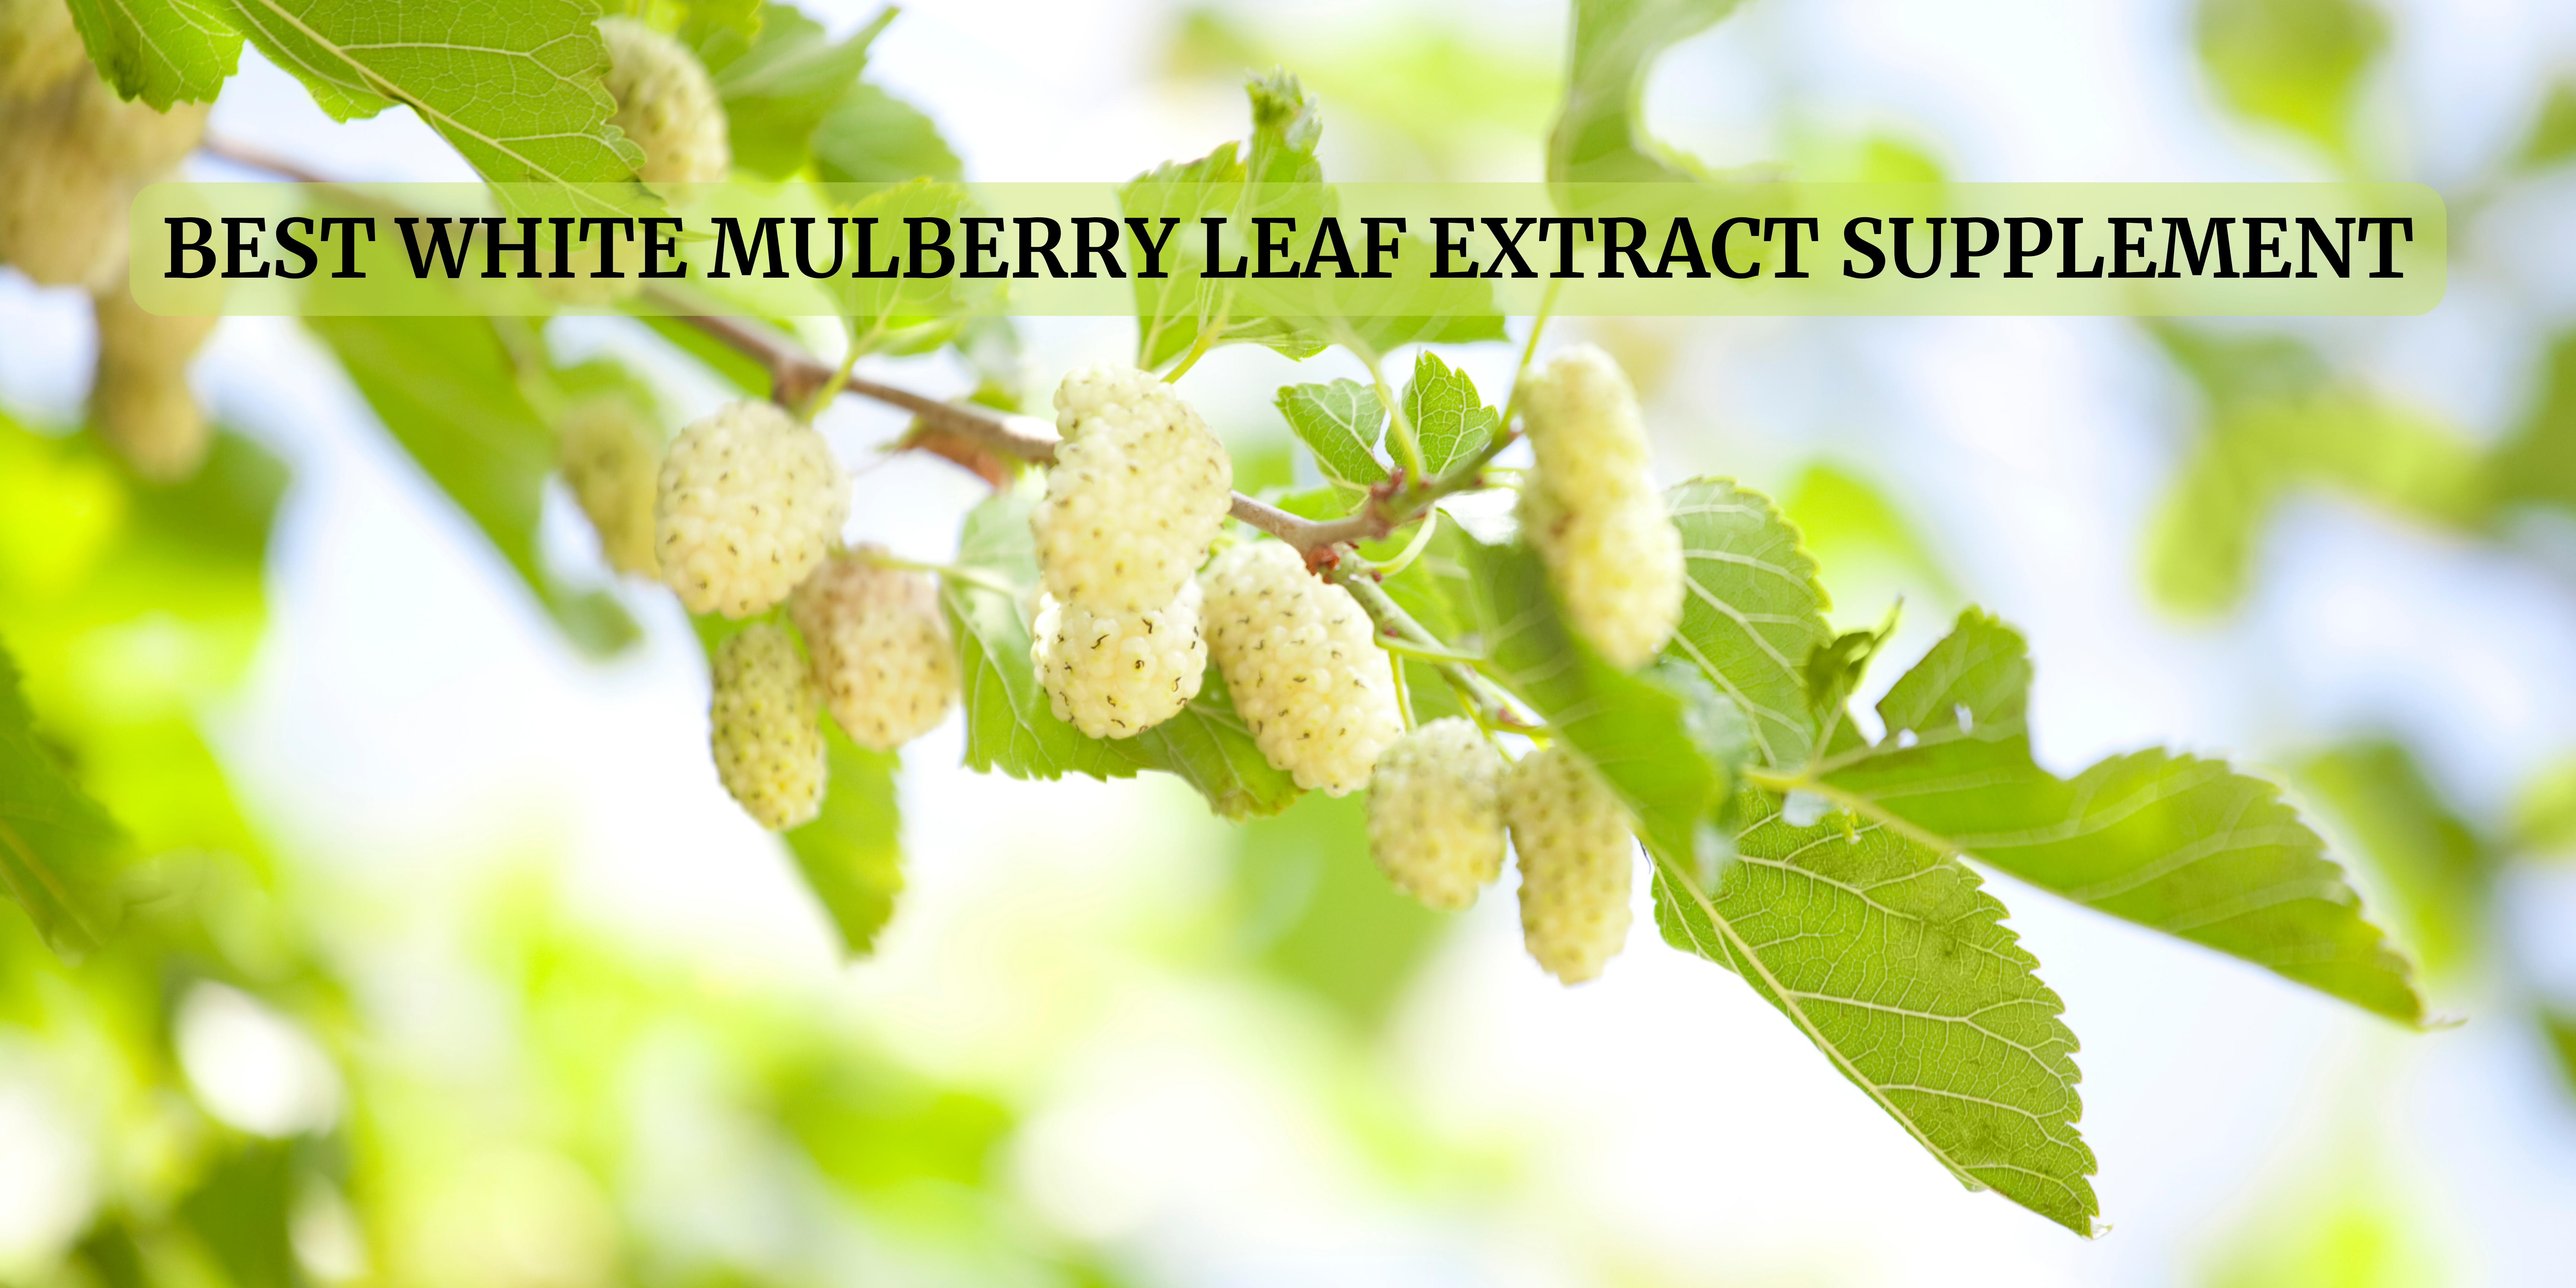 white mulberry leaf extract supplement in Sweden